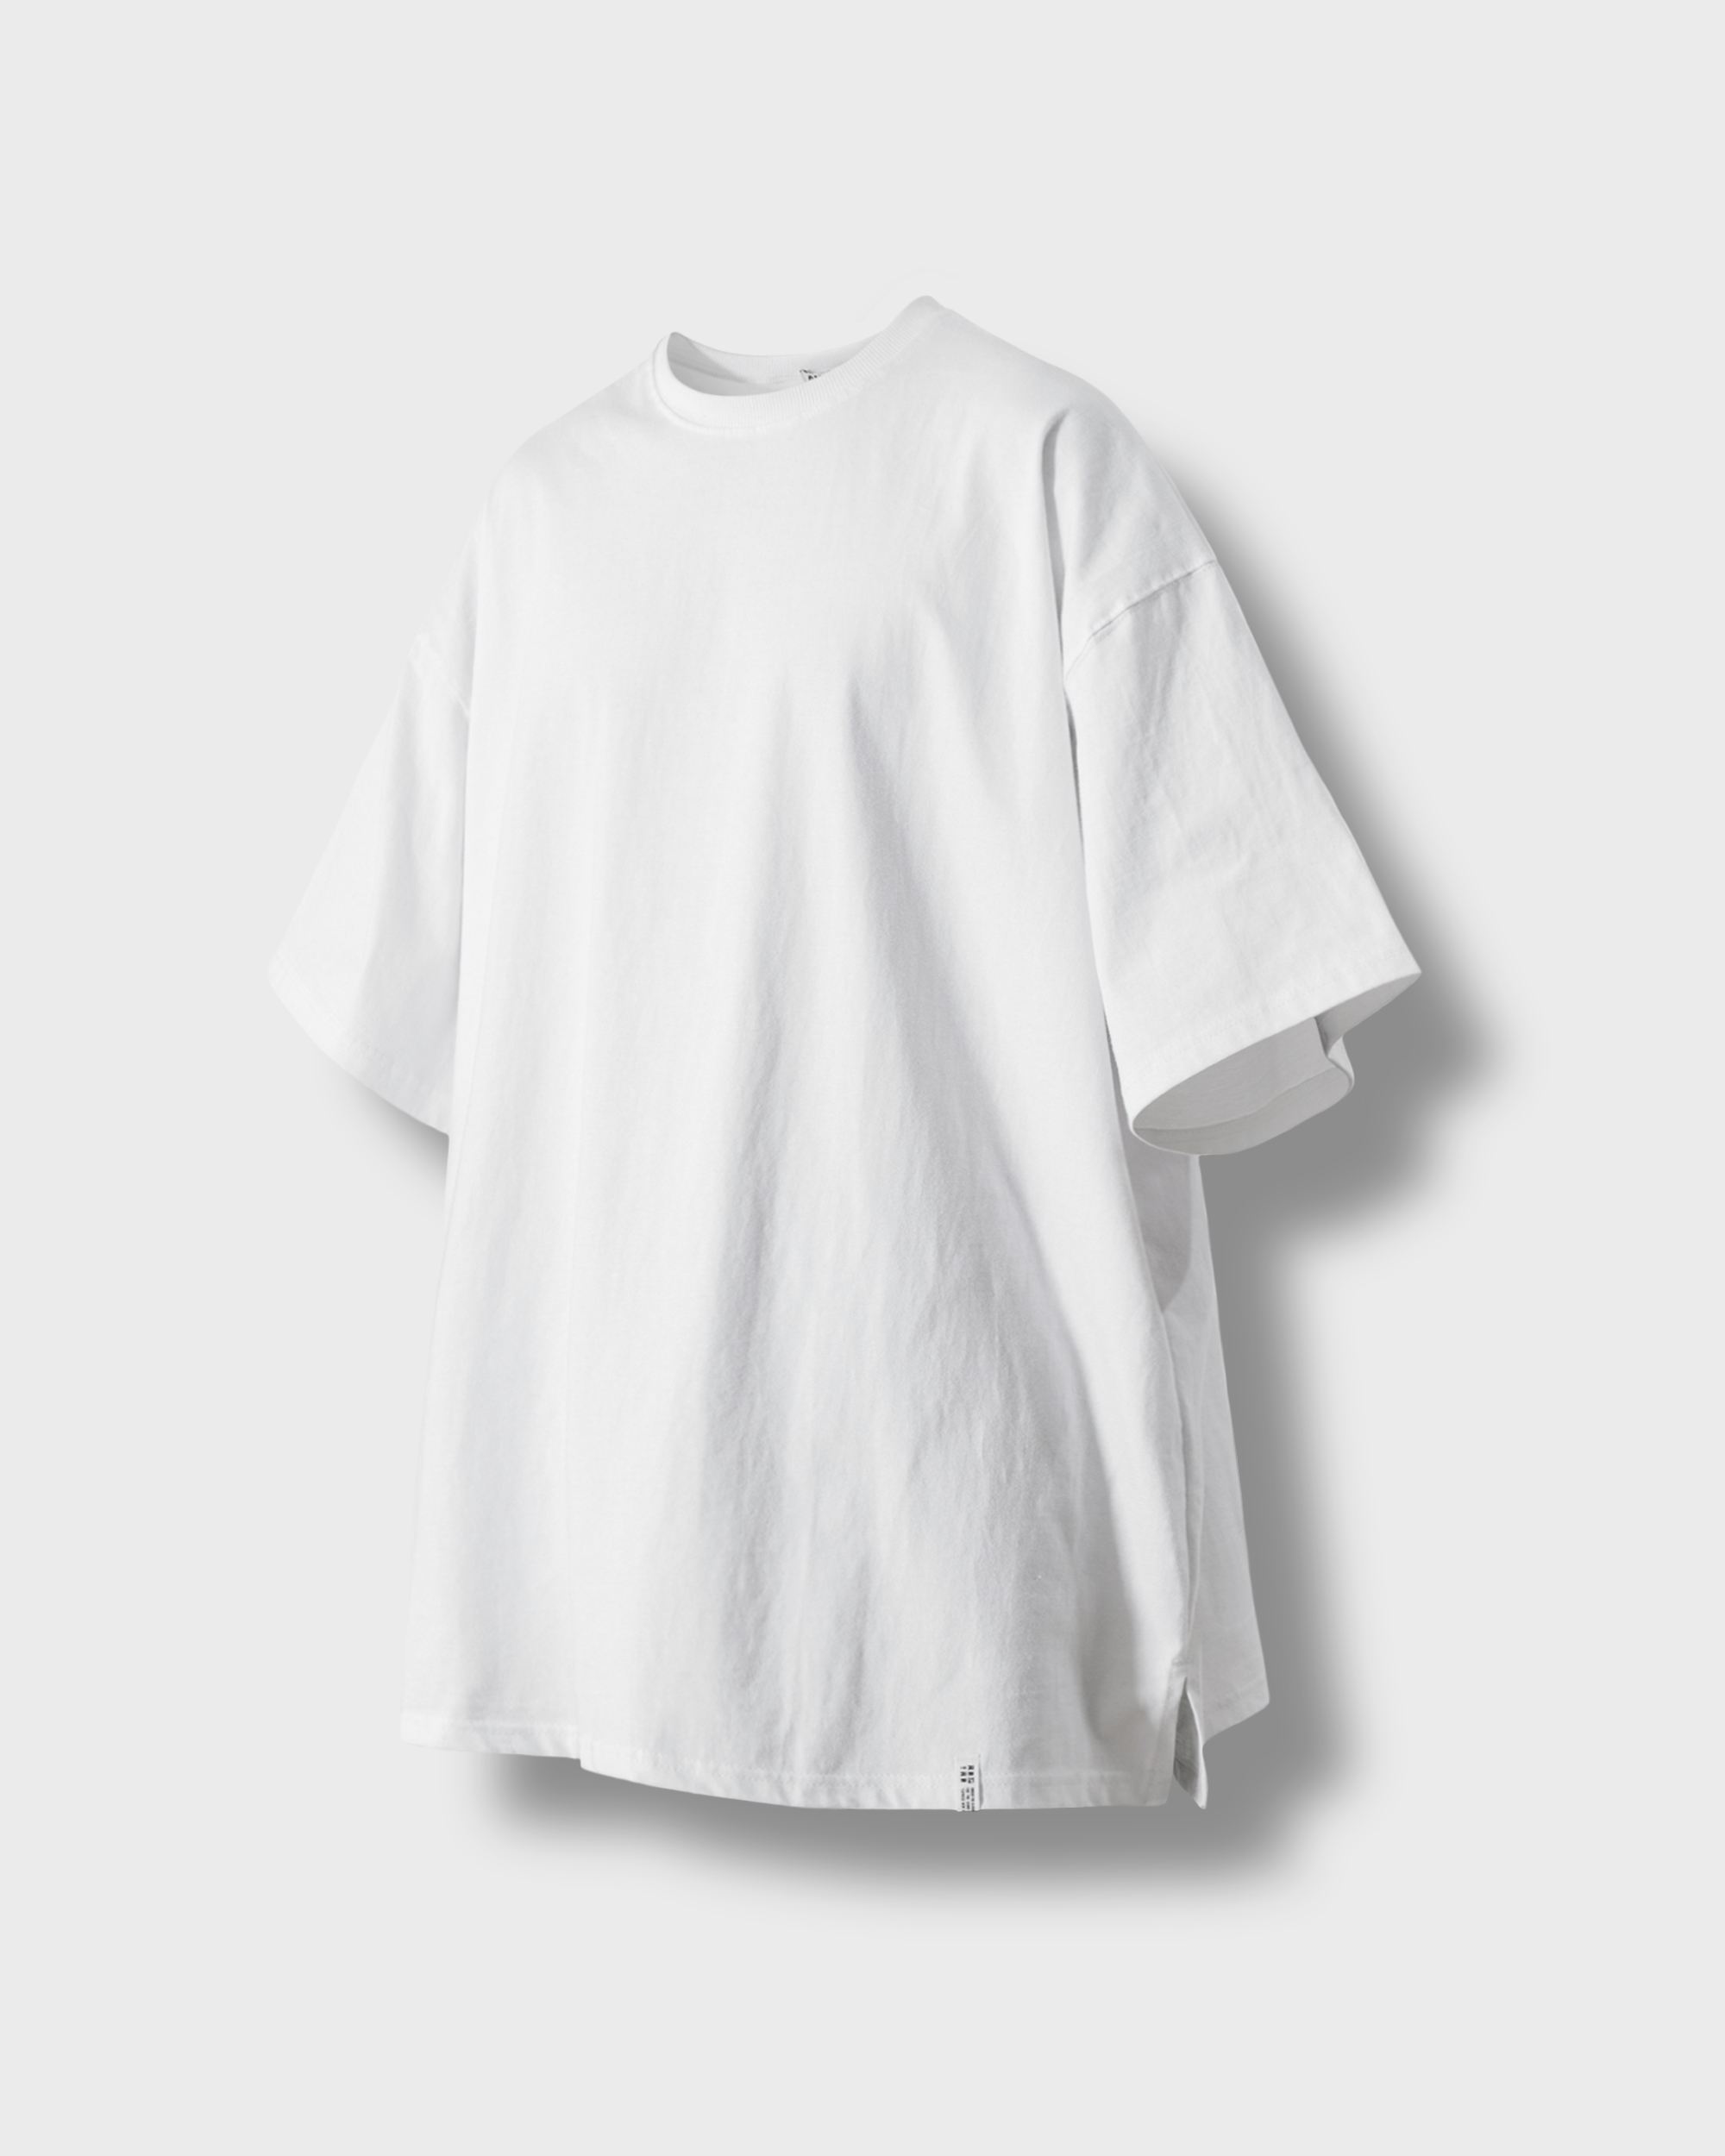 [AG] Layered Essential Label Half Tee - White